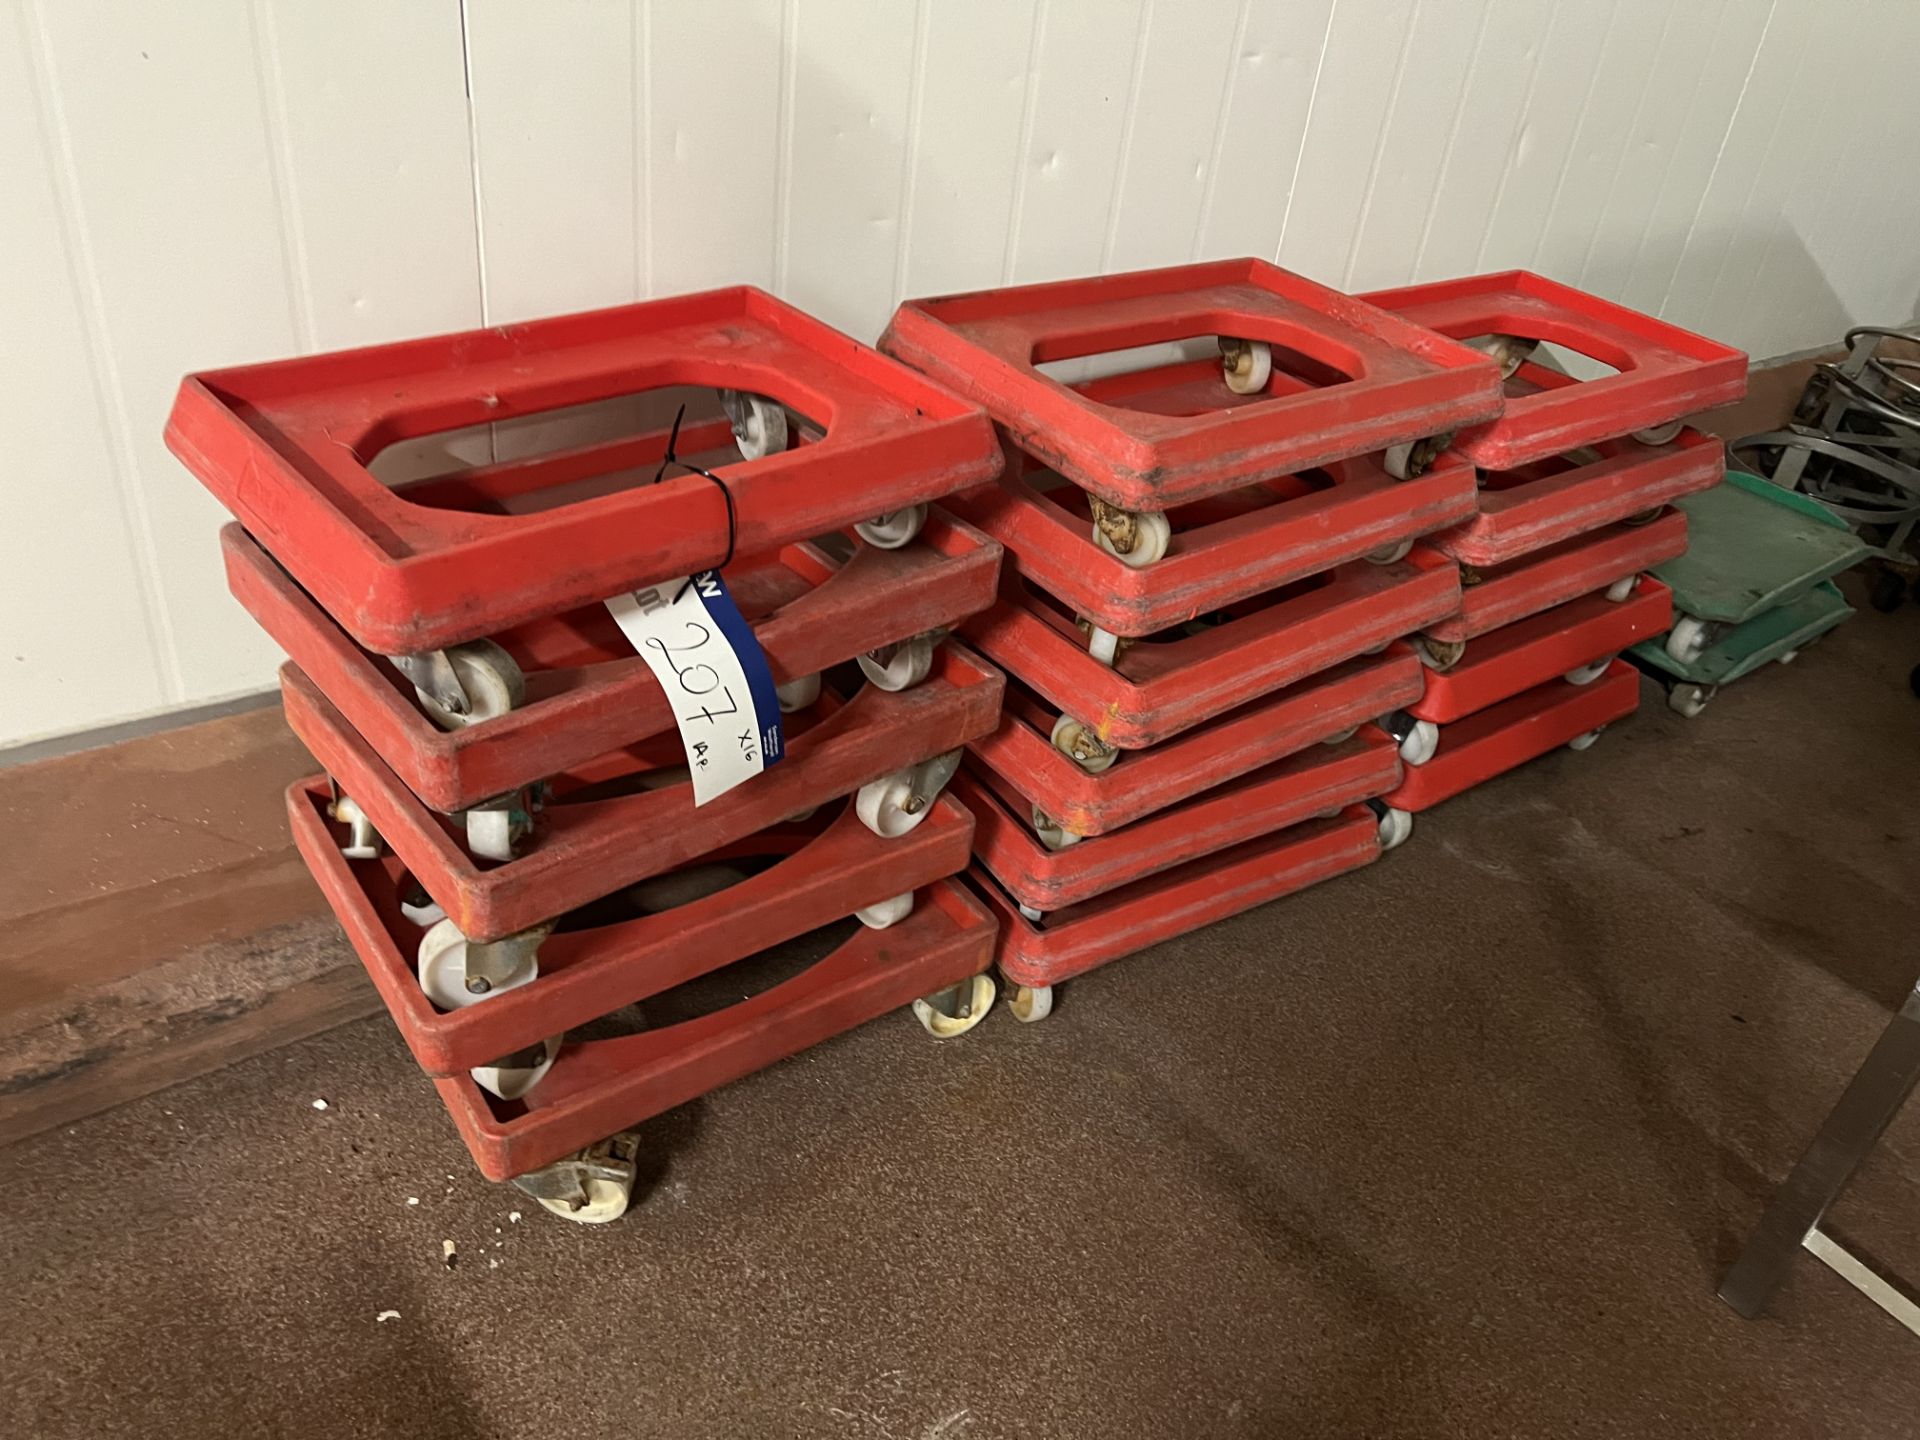 16 Red Tray Dollies, tray size approx. 550mm x 350mm wide, lift out charge - £20 + VAT, lot